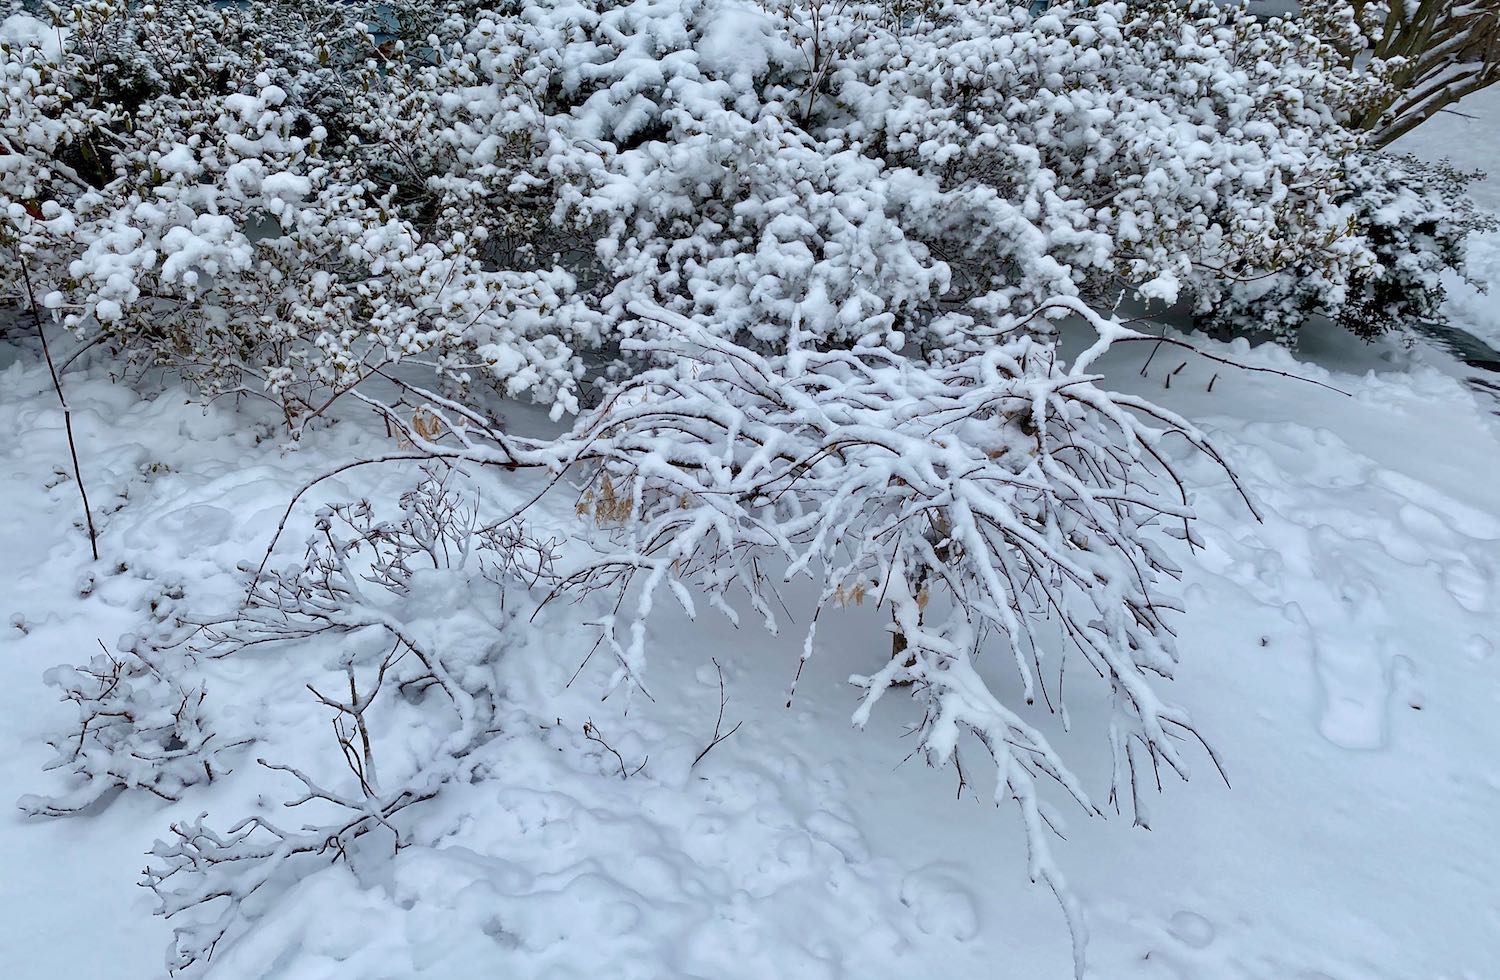 It's the weekend! Number 284, Snow-Covered Shrubs